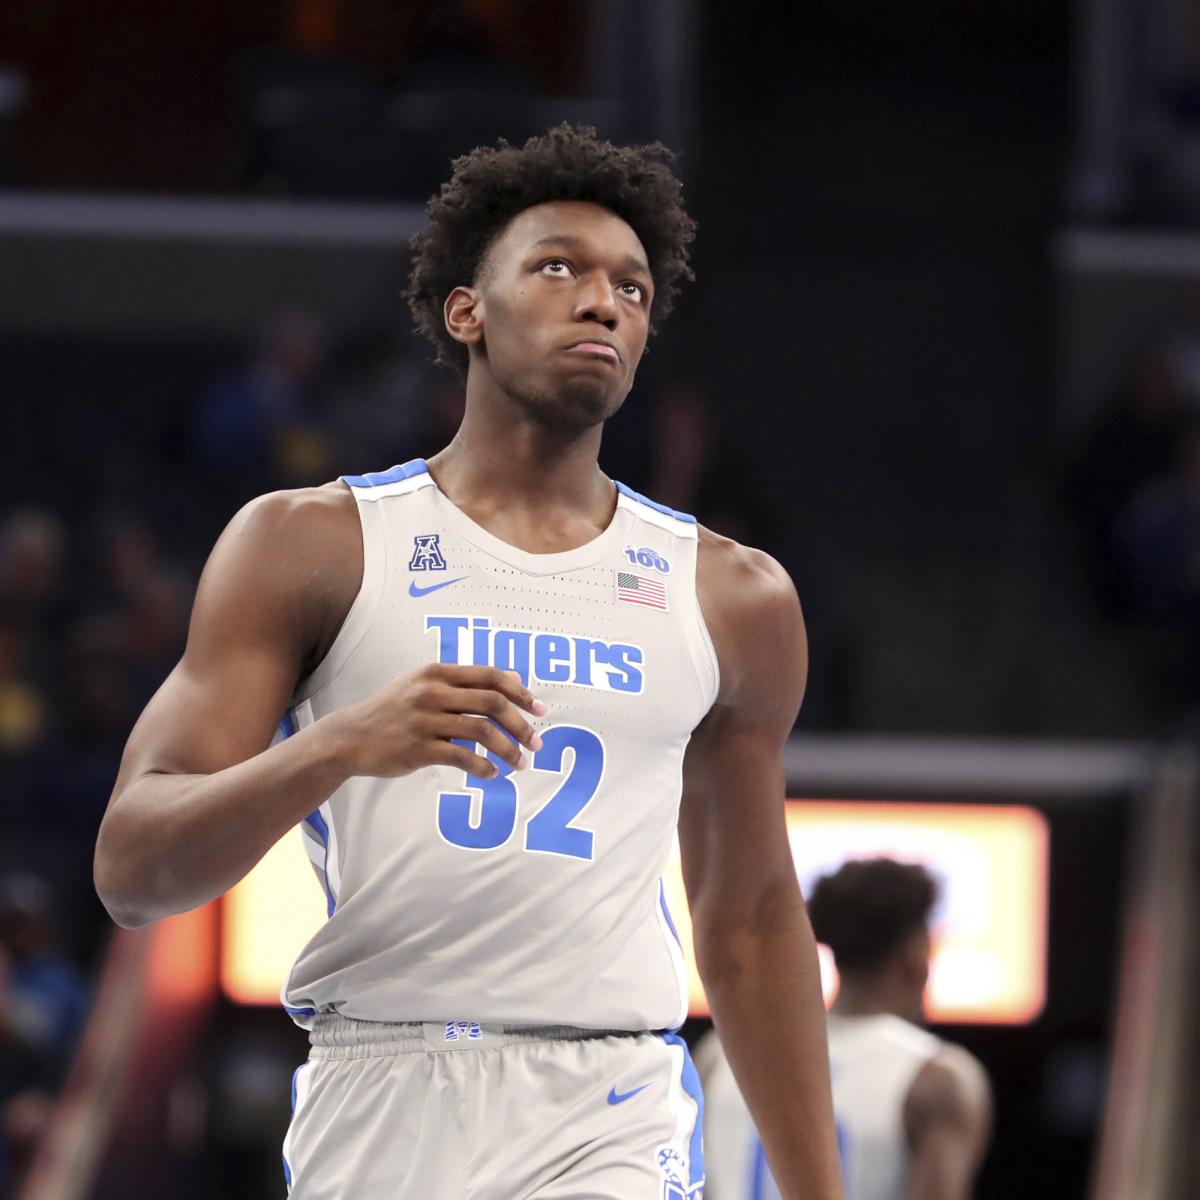 2020 NBA Mock Draft: 3 Trades That Would Turn Lottery Upside-Down